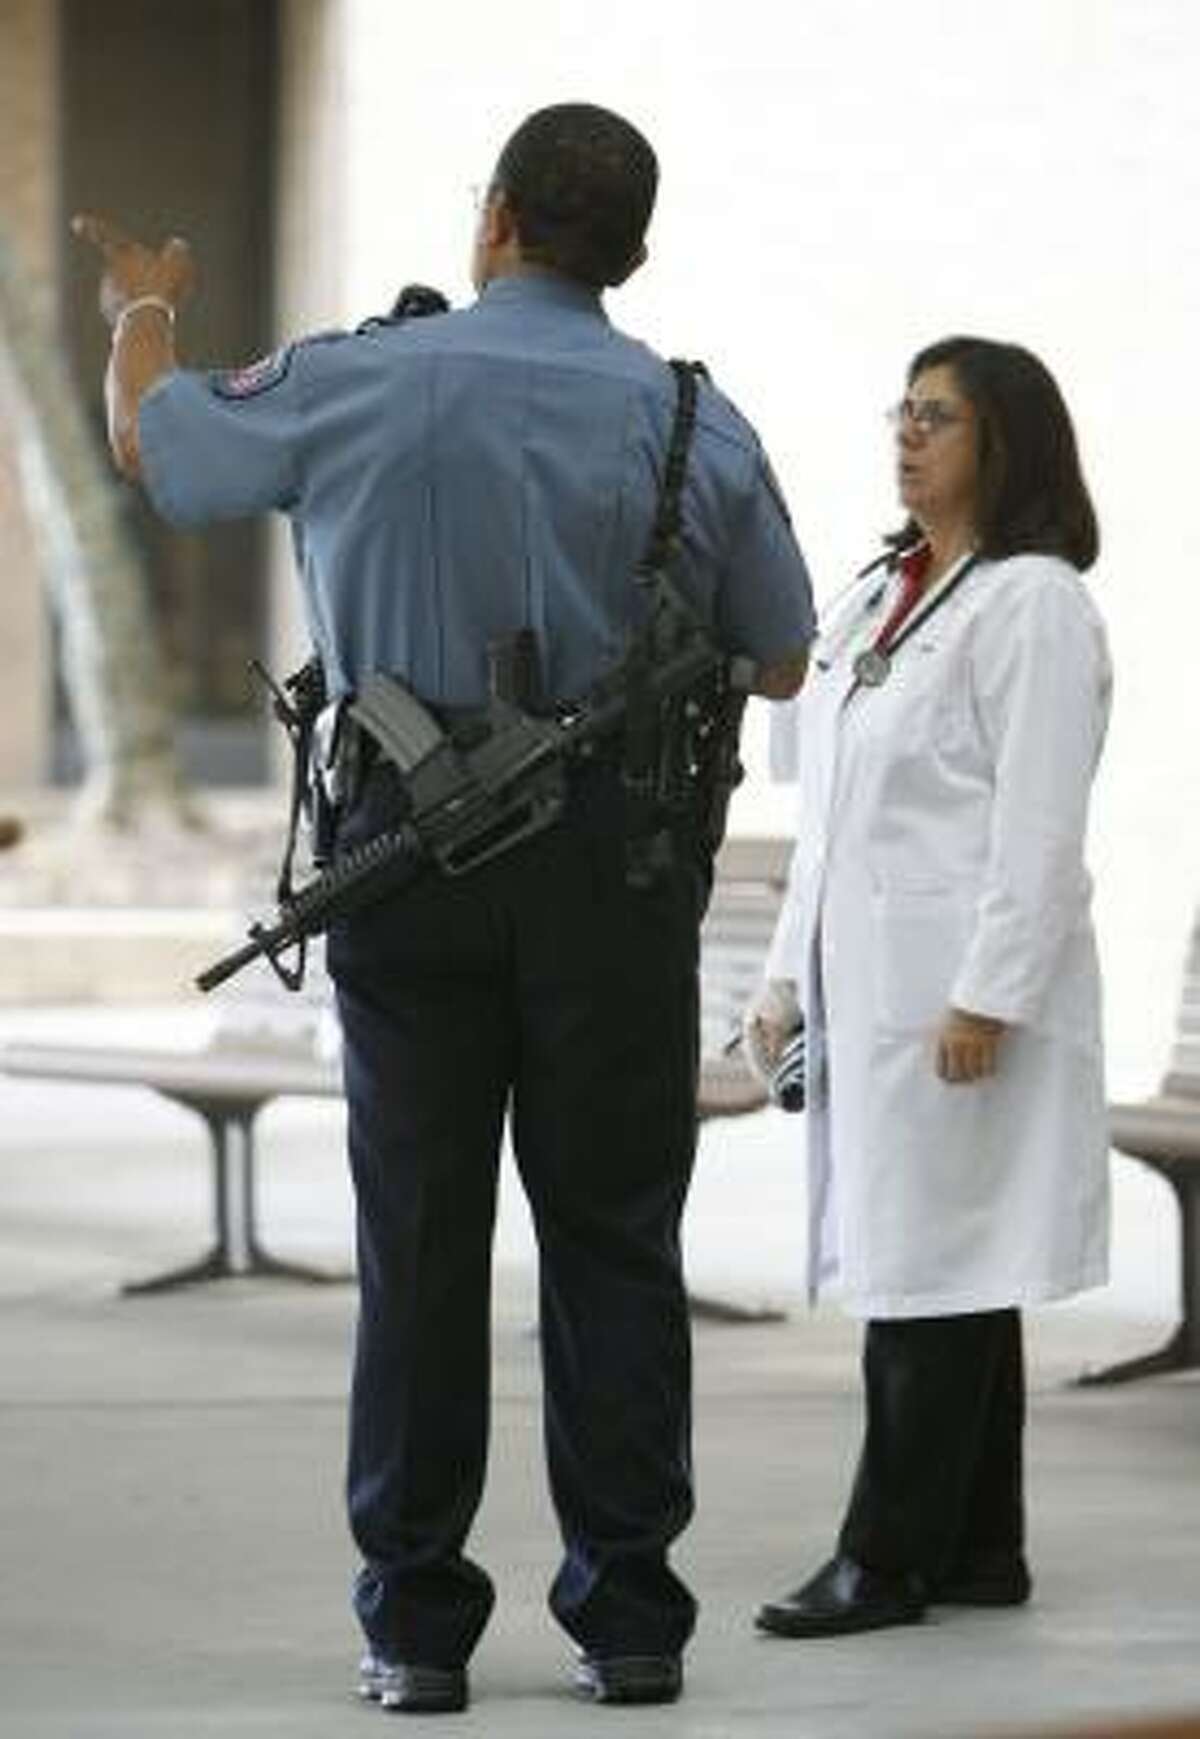 A UTMB officer guards Galveston's John Sealy Hospital with semiautomatic weapons as the hospital reopens Monday.